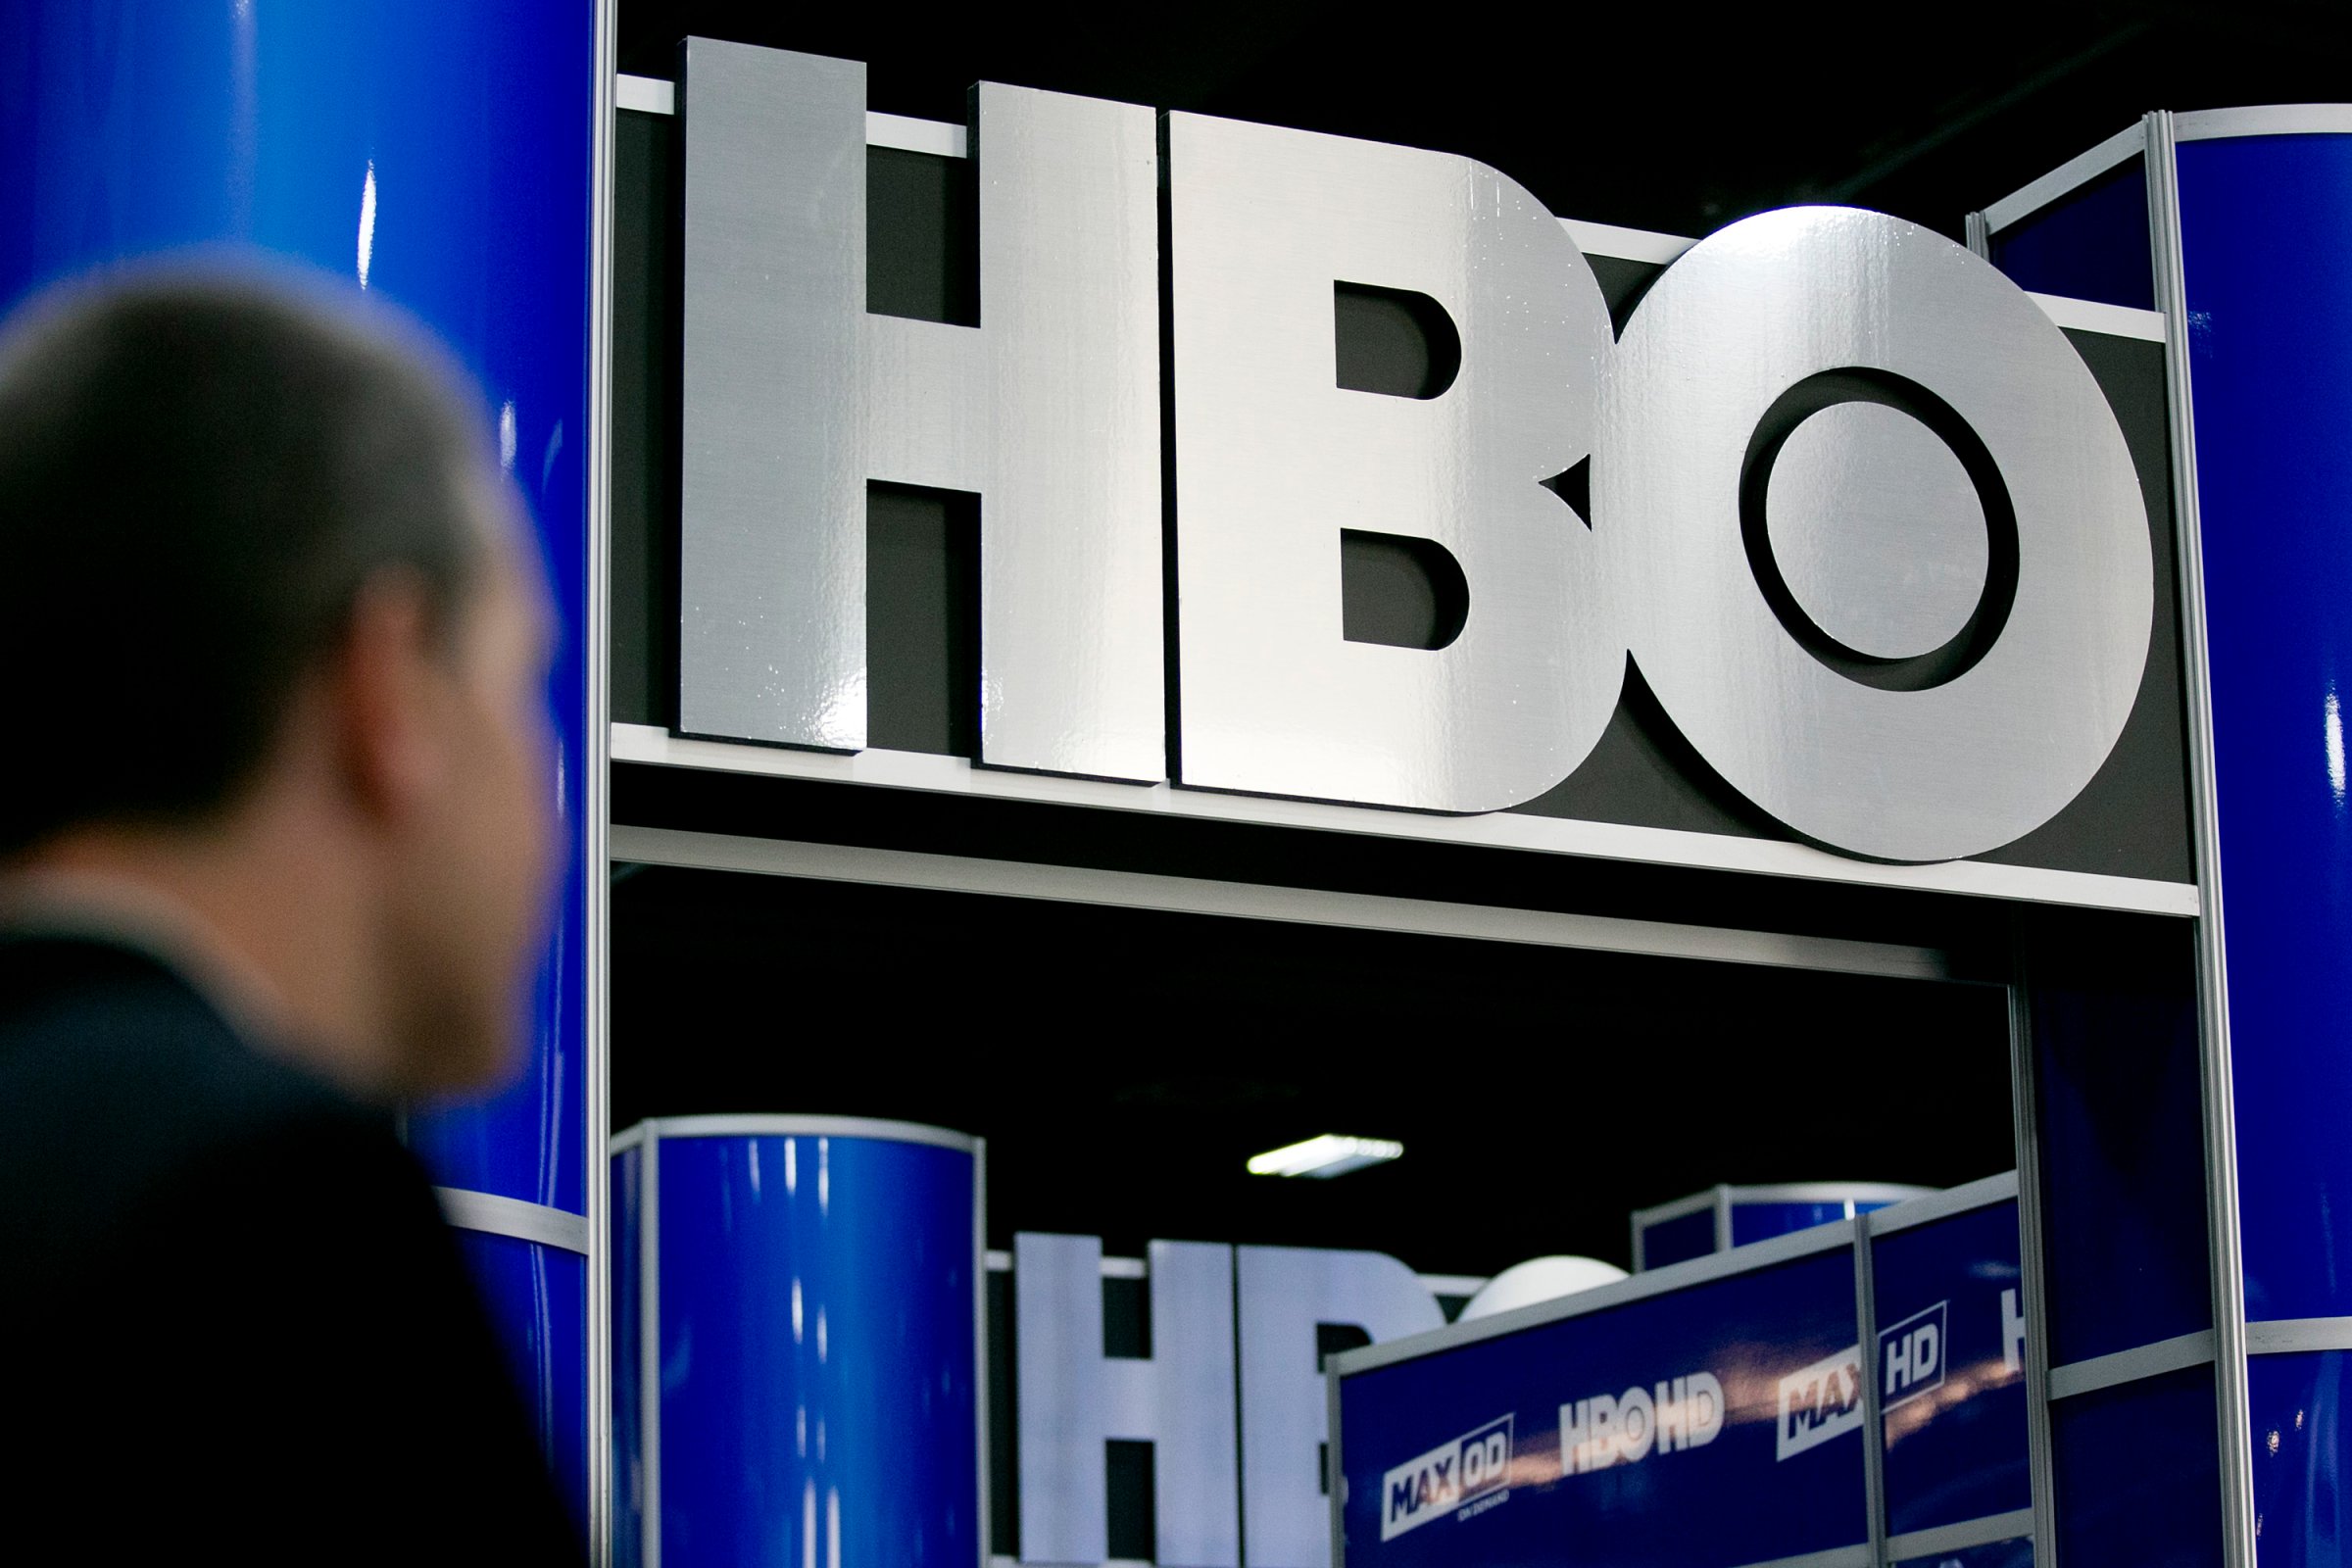 The logo of Home Box Office Inc. (HBO) is seen on the exhibit floor during the National Cable and Telecommunications Association (NCTA) Cable Show in Washington on June 11, 2013.